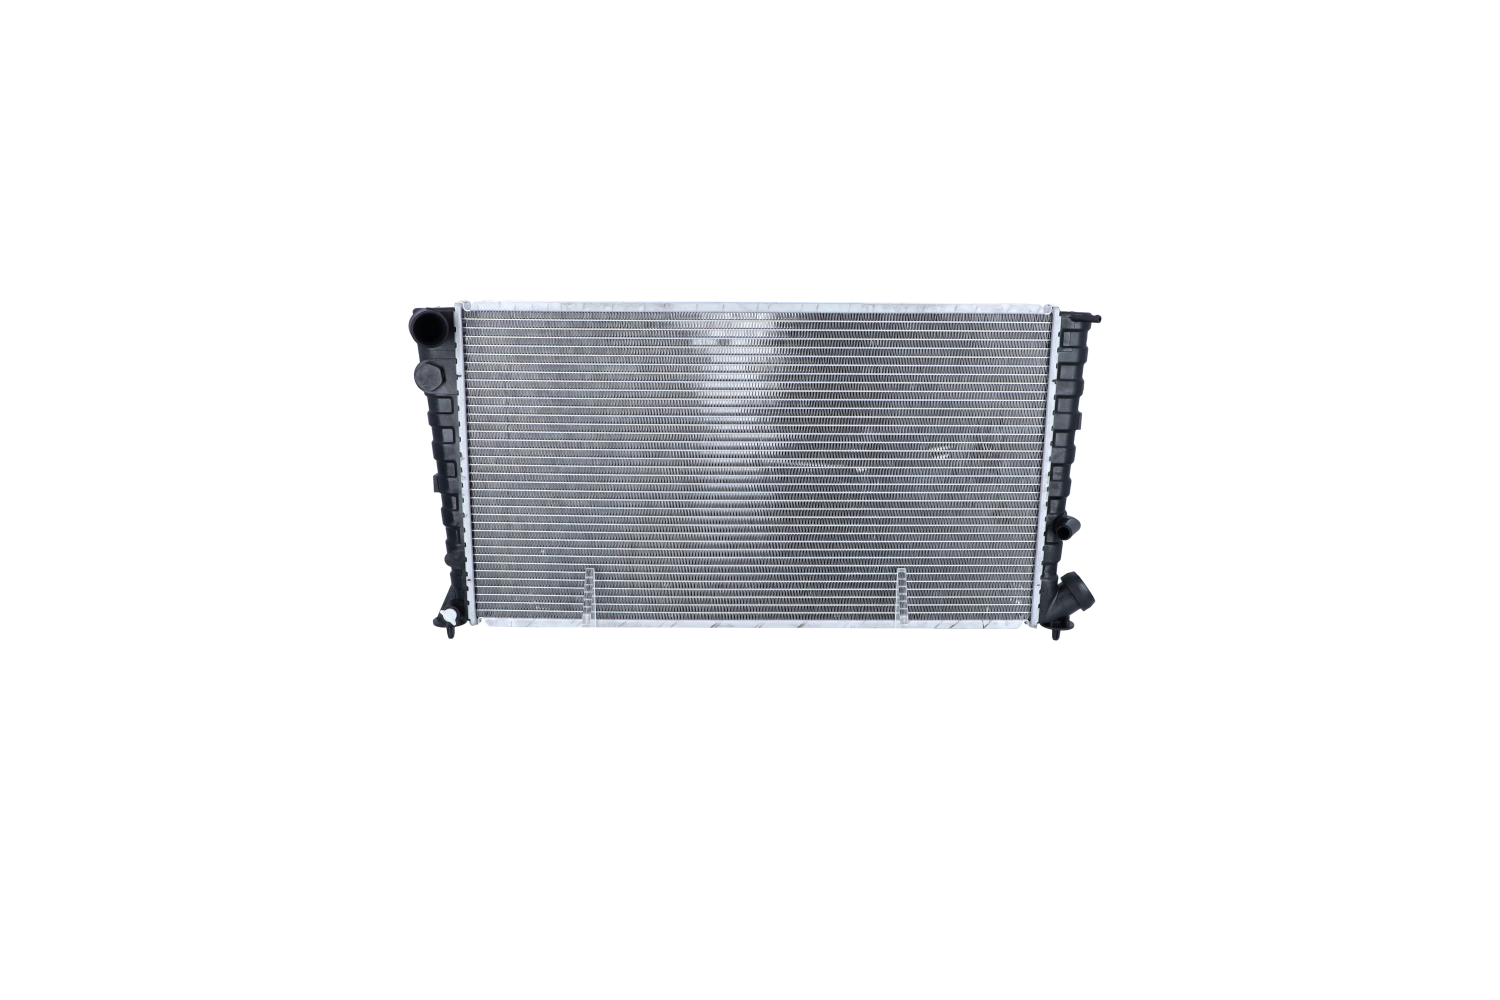 NRF EASY FIT 519510 Engine radiator Aluminium, 669 x 366 x 34 mm, with mounting parts, Brazed cooling fins